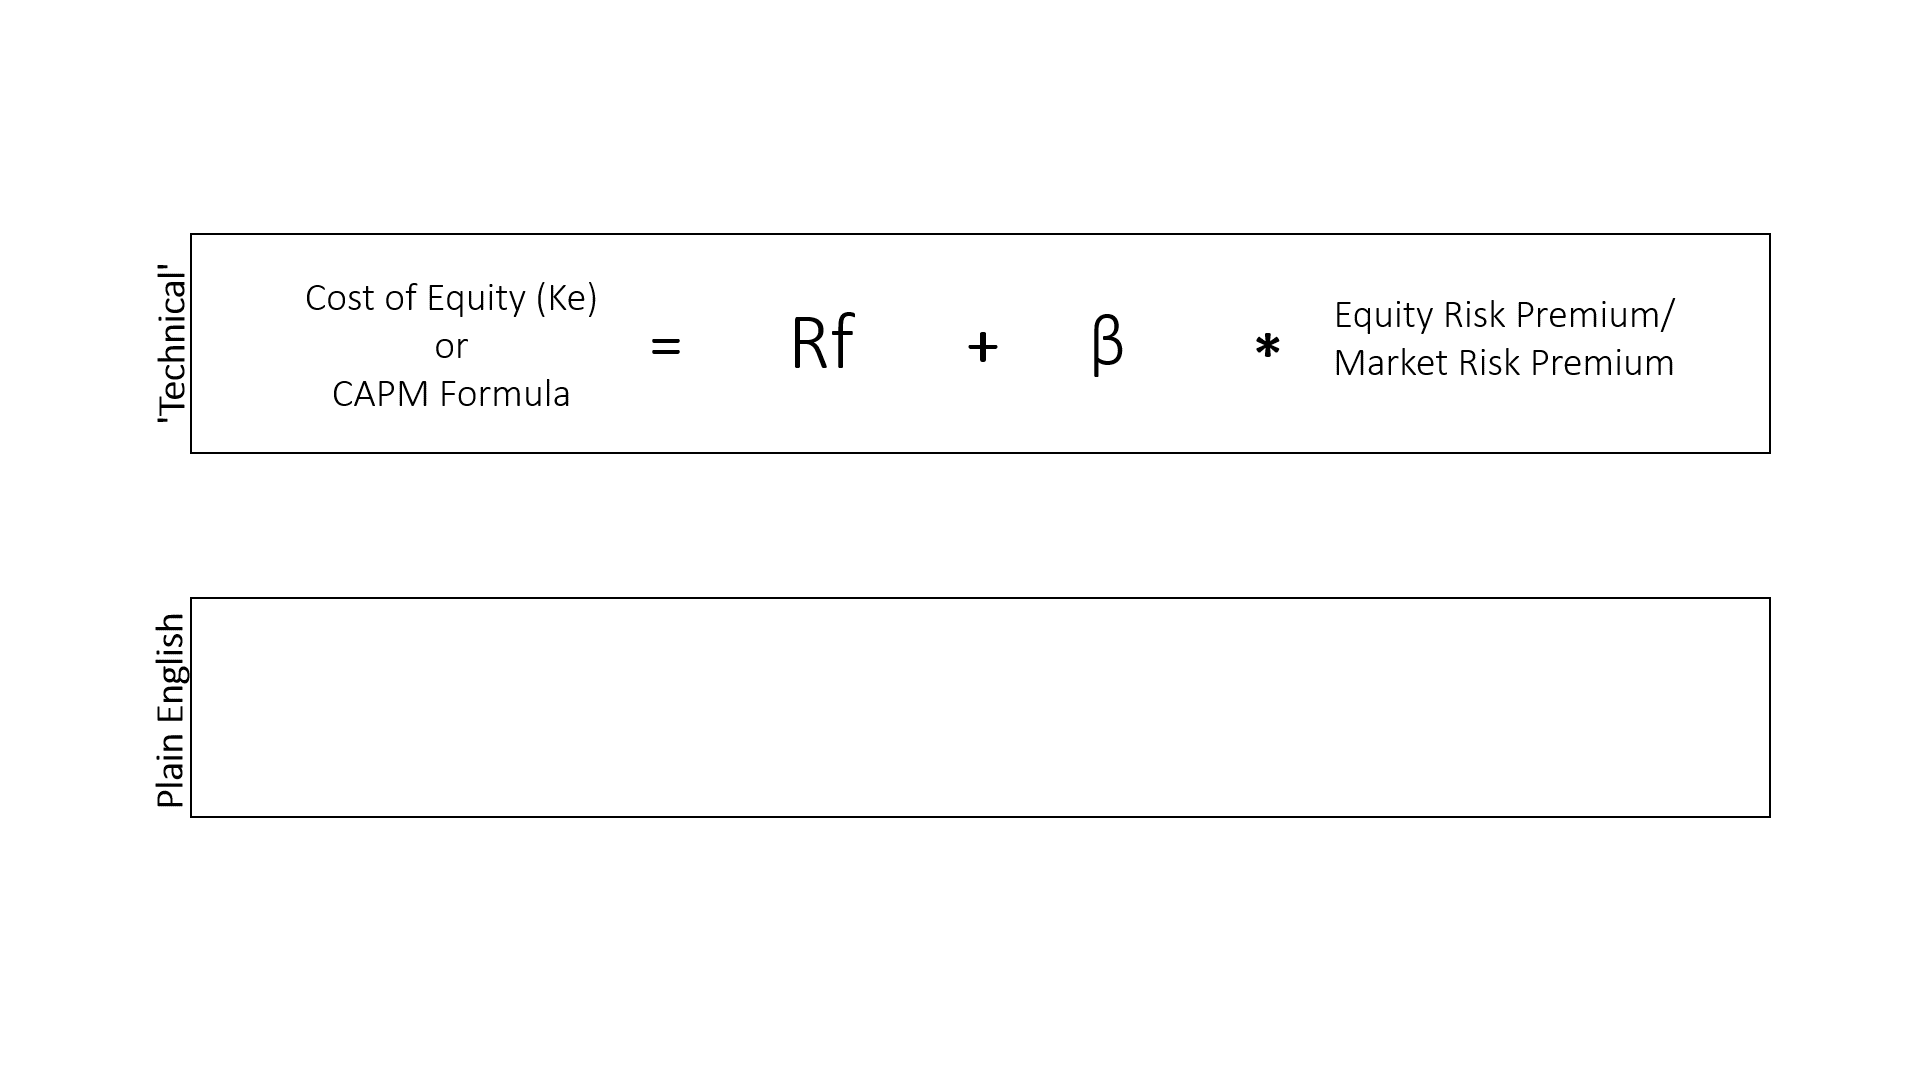 An Image showing the components of the Capital Asset Pricing Model